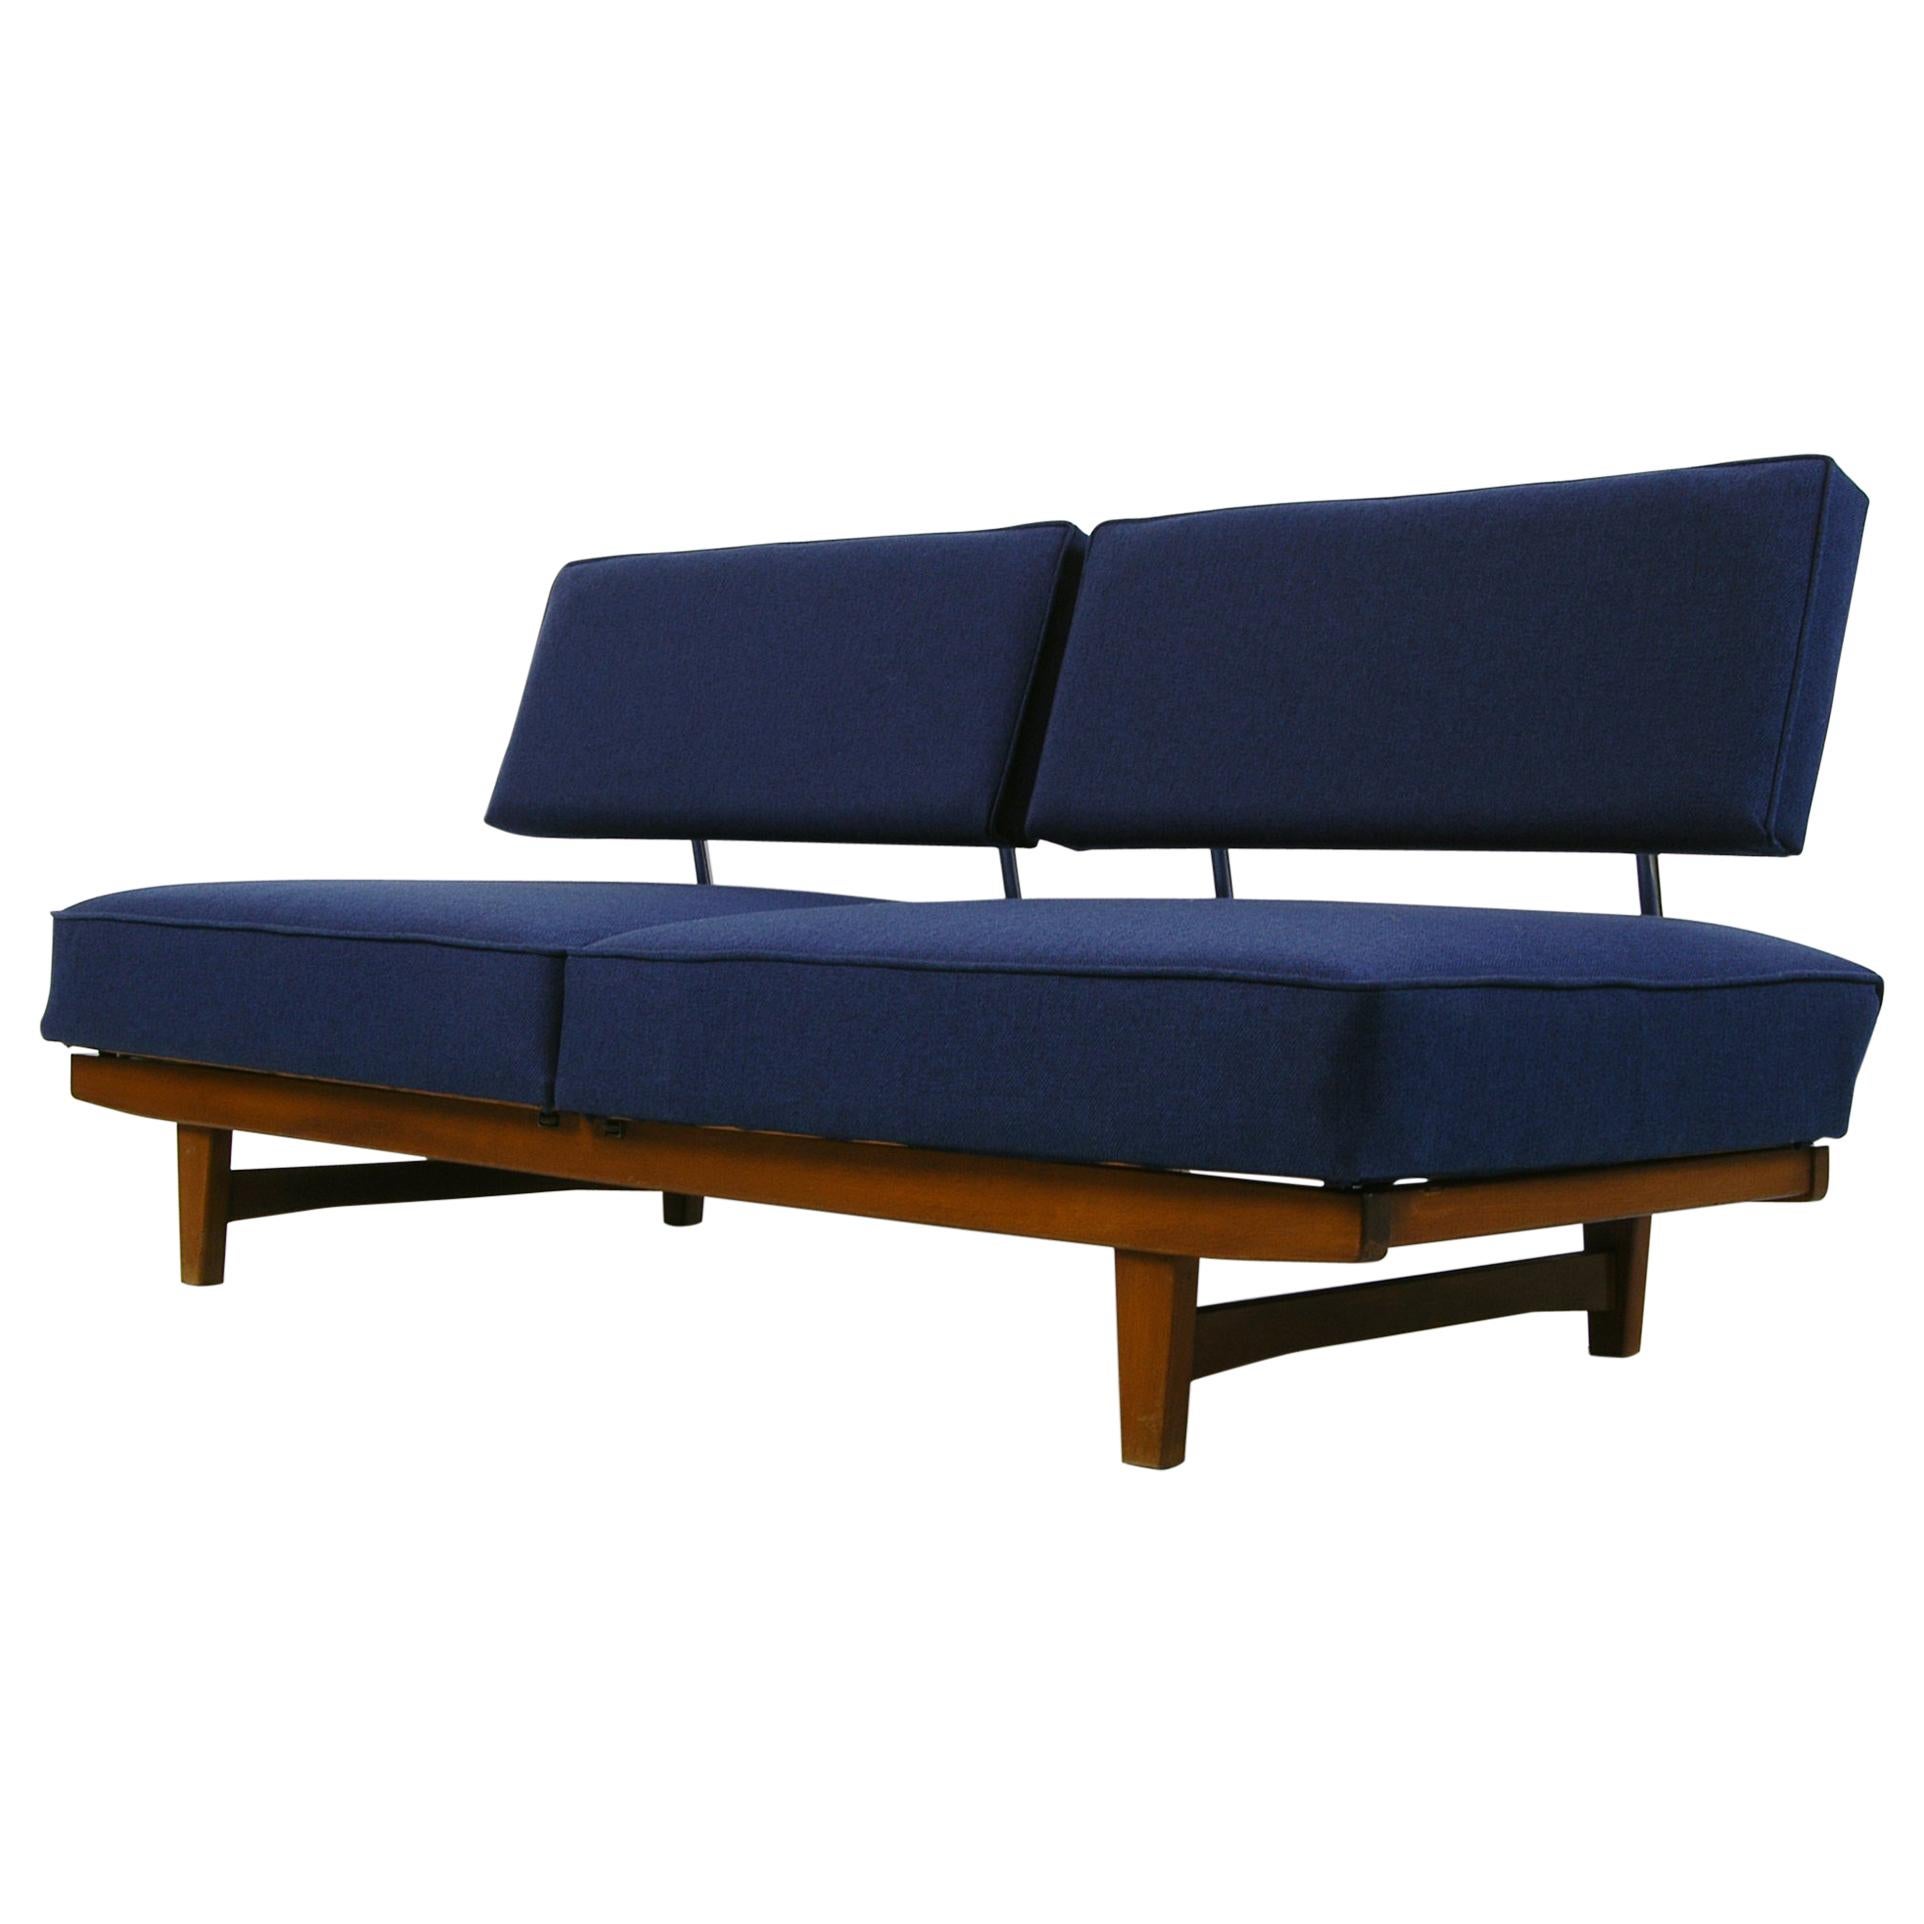 Vintage 1950s Mid-Century Modern Knoll 'Stella’ Convertible Daybed Sofa Couch